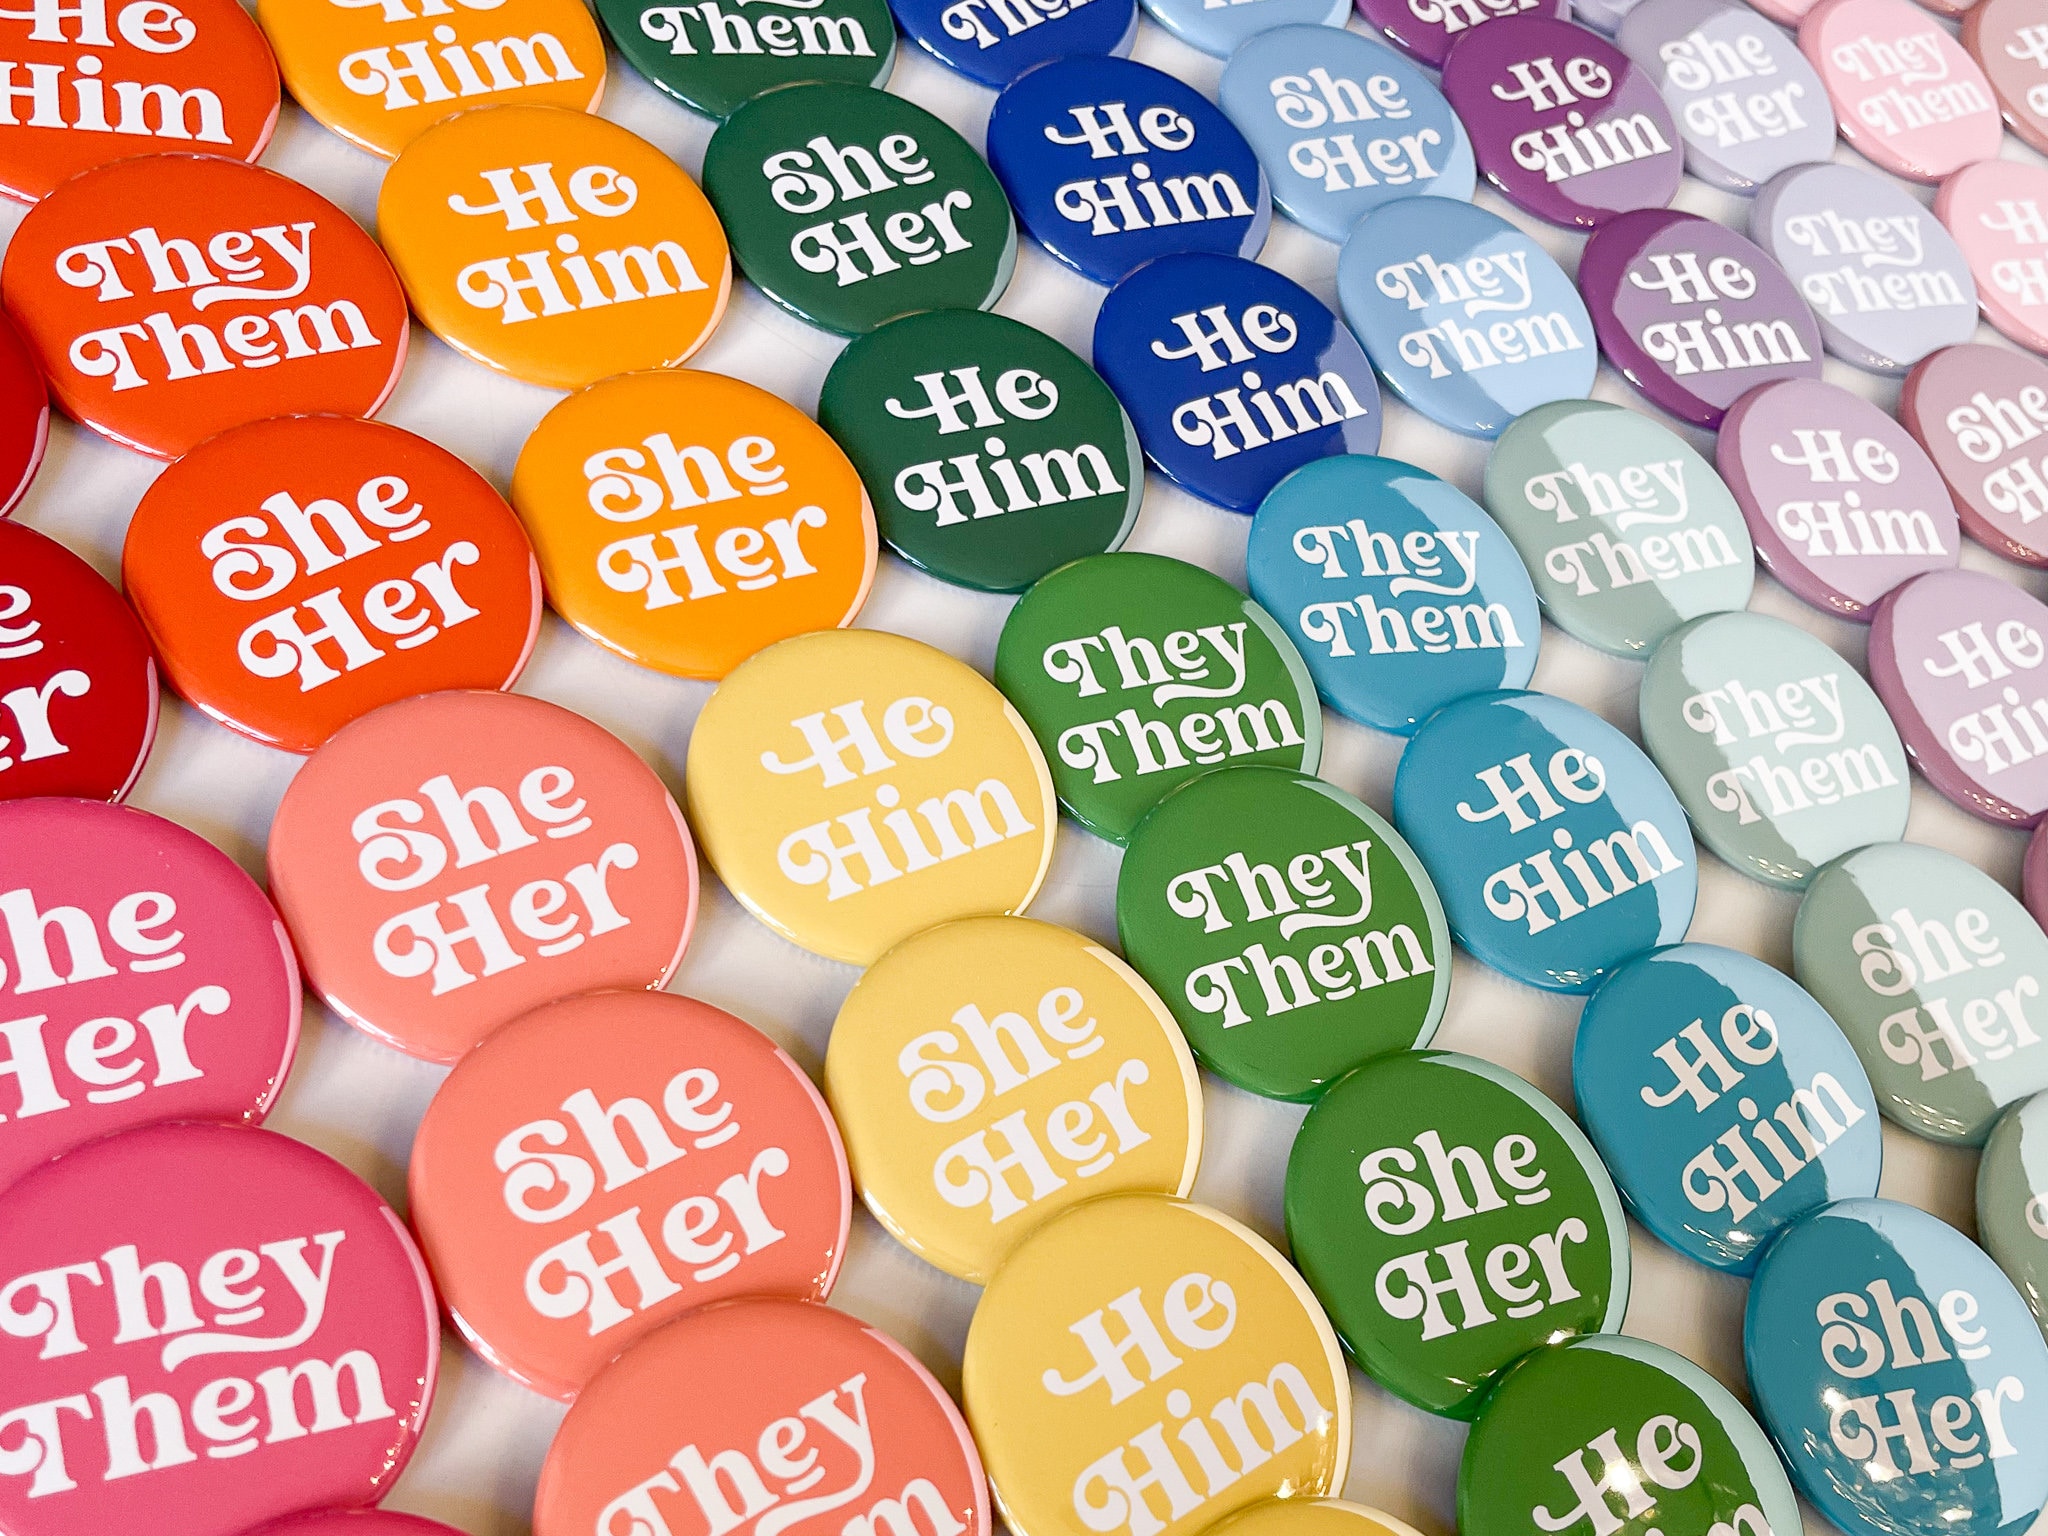 Pronoun Buttons in Bulk – All Are Welcome Here